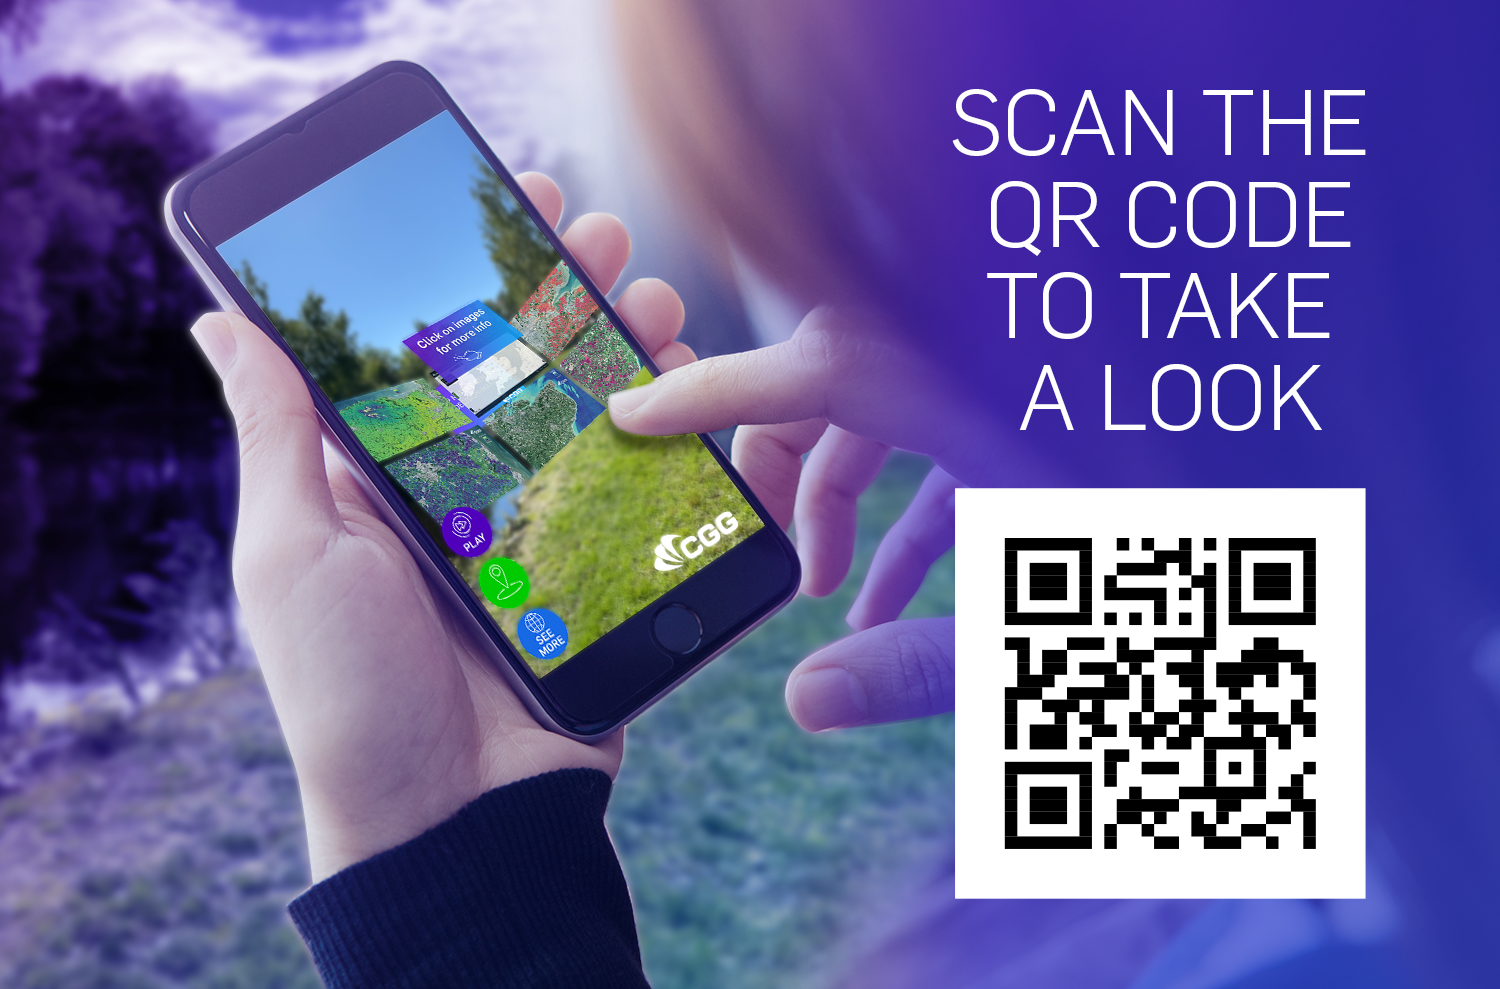 Scan the QR code for our Natural Insights AR experience